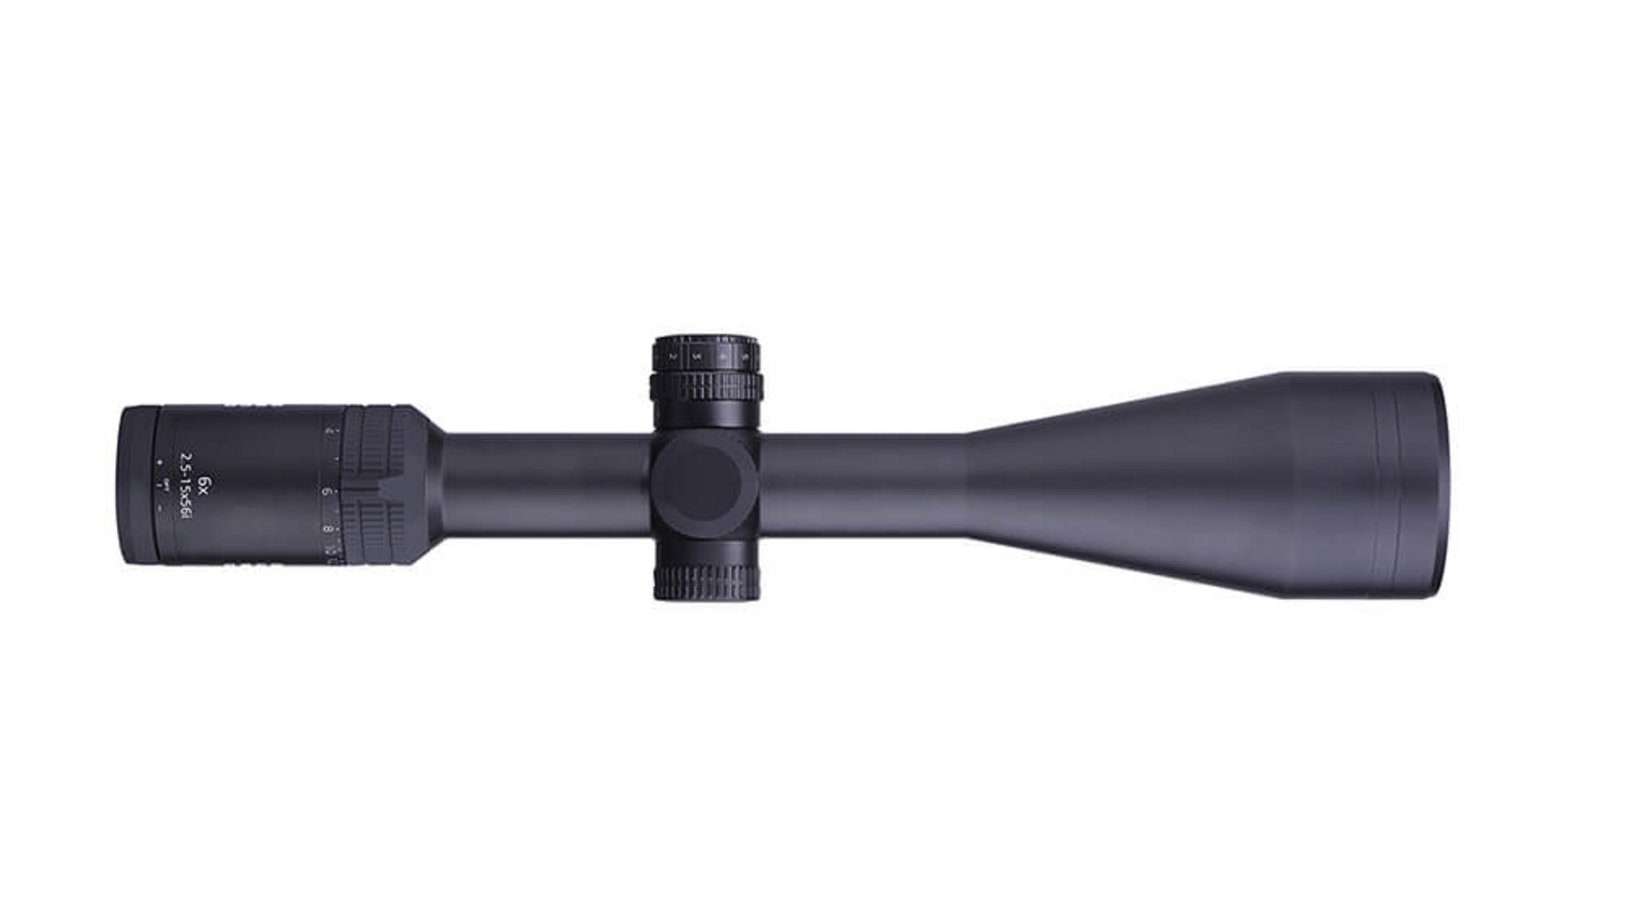 Top view image of the GECO Riflescope Gold 2,5-15x56i